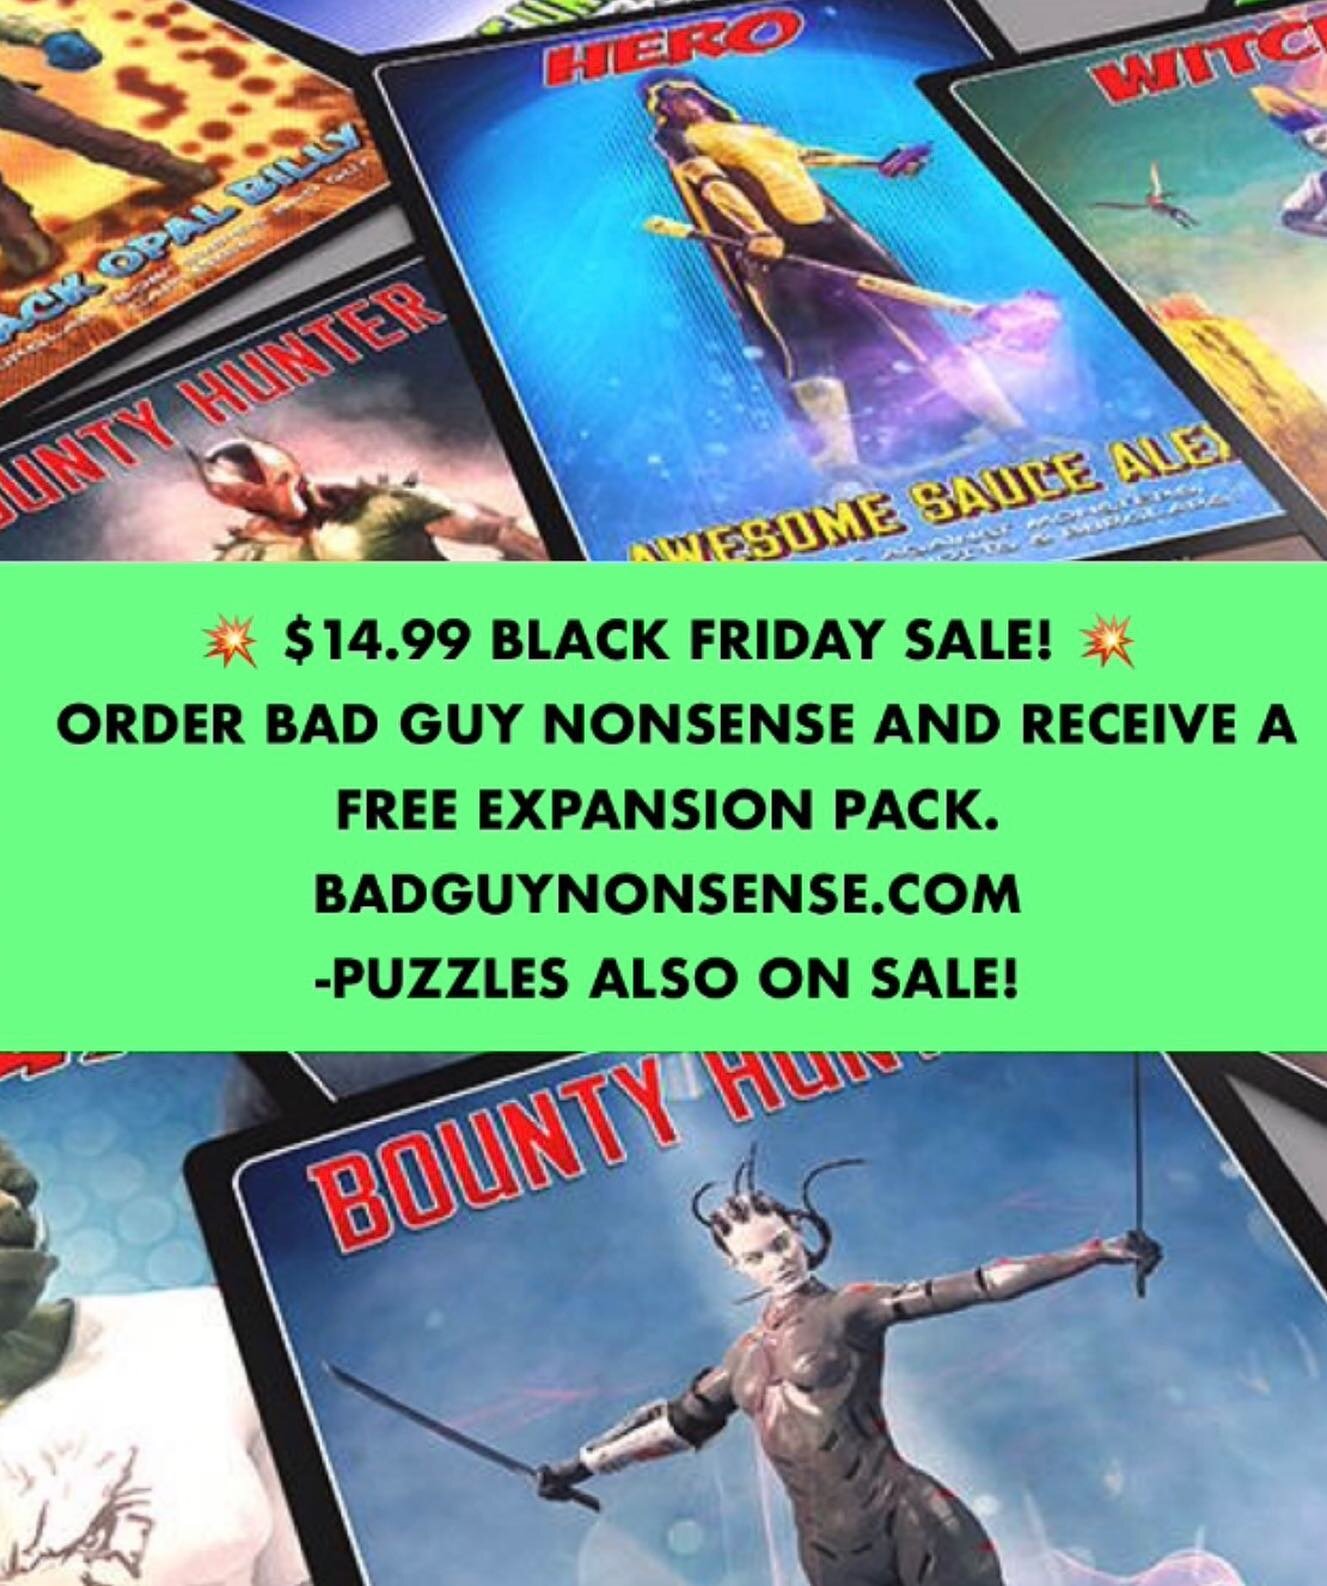 Bad Guy Nonsense is a great Holiday gift and now on sale!🎄 🎅 

#blackfriday #blackfridaysale #cardgame #boardgame #kickstartergames